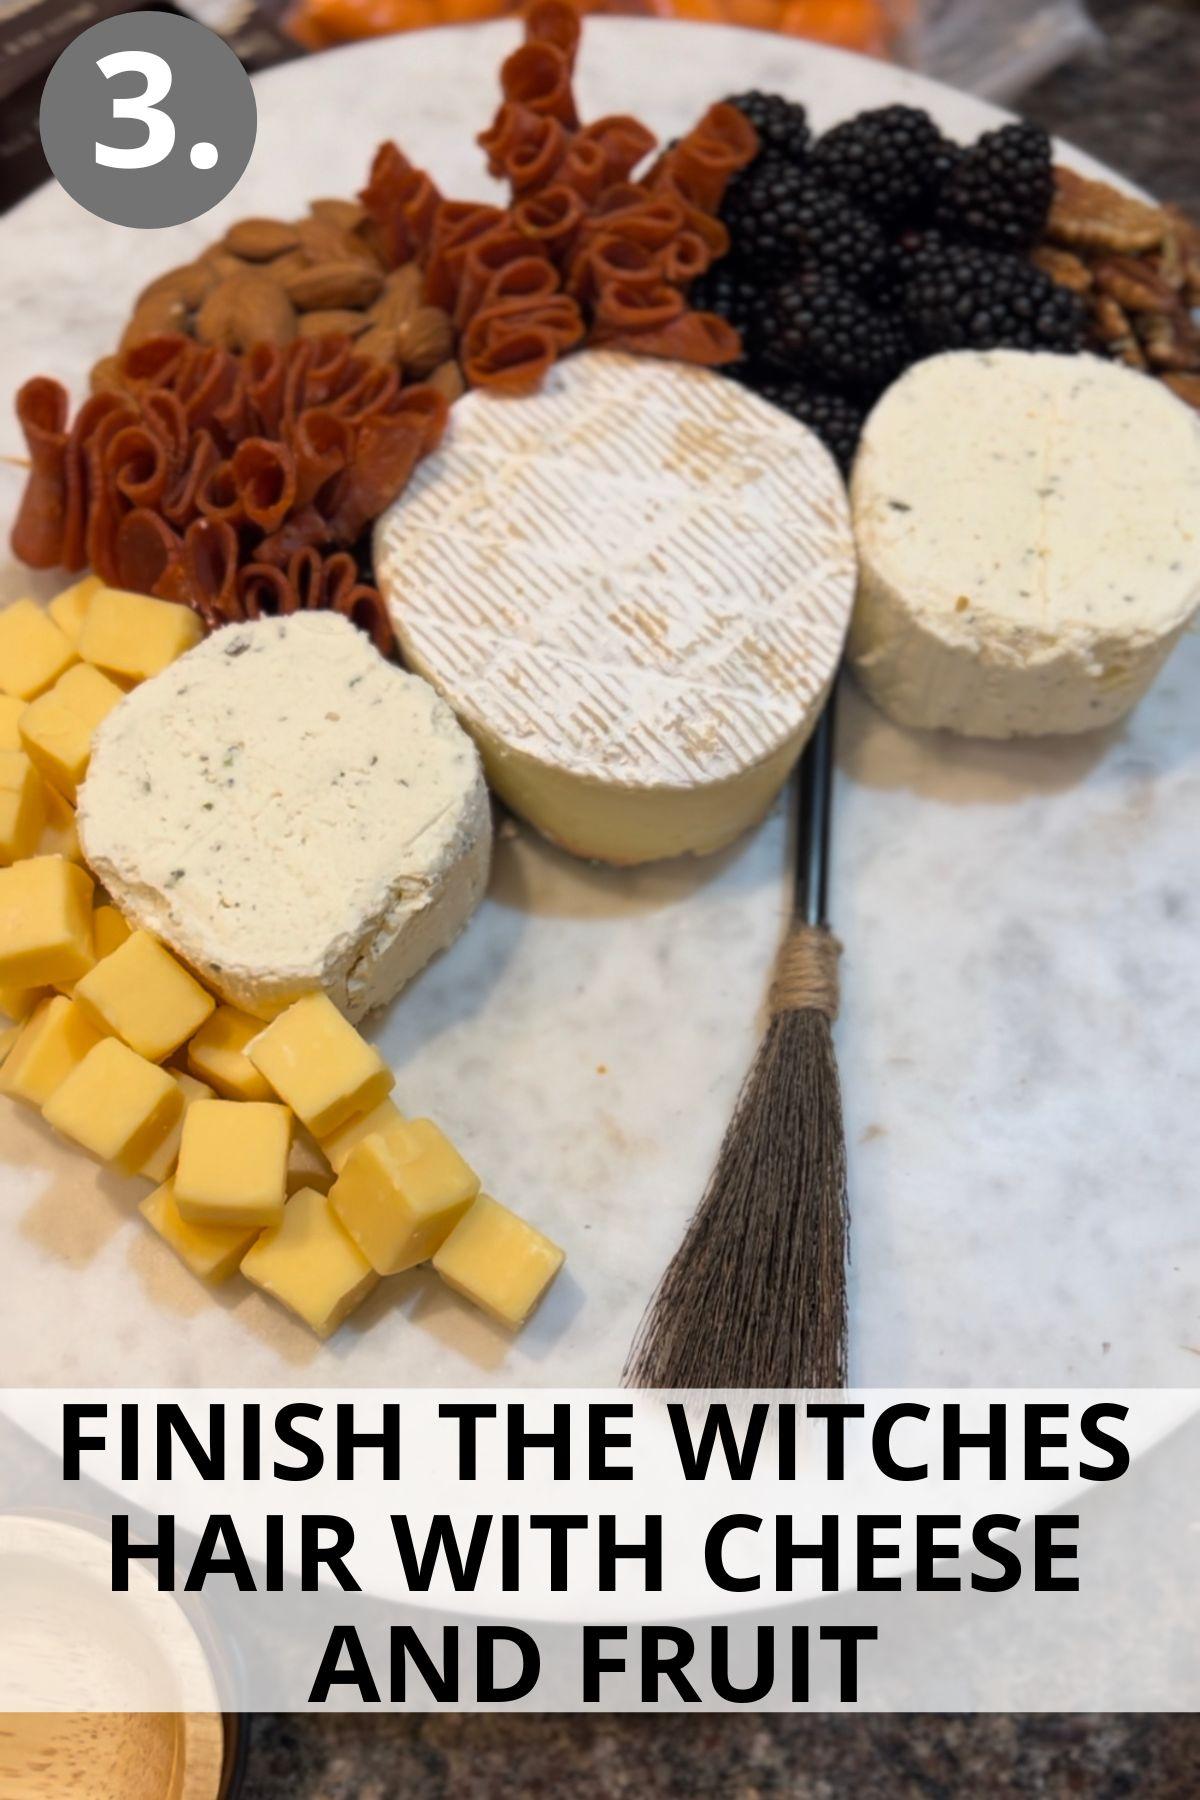 Hocus Pocus Charcuterie Board step by step instructions